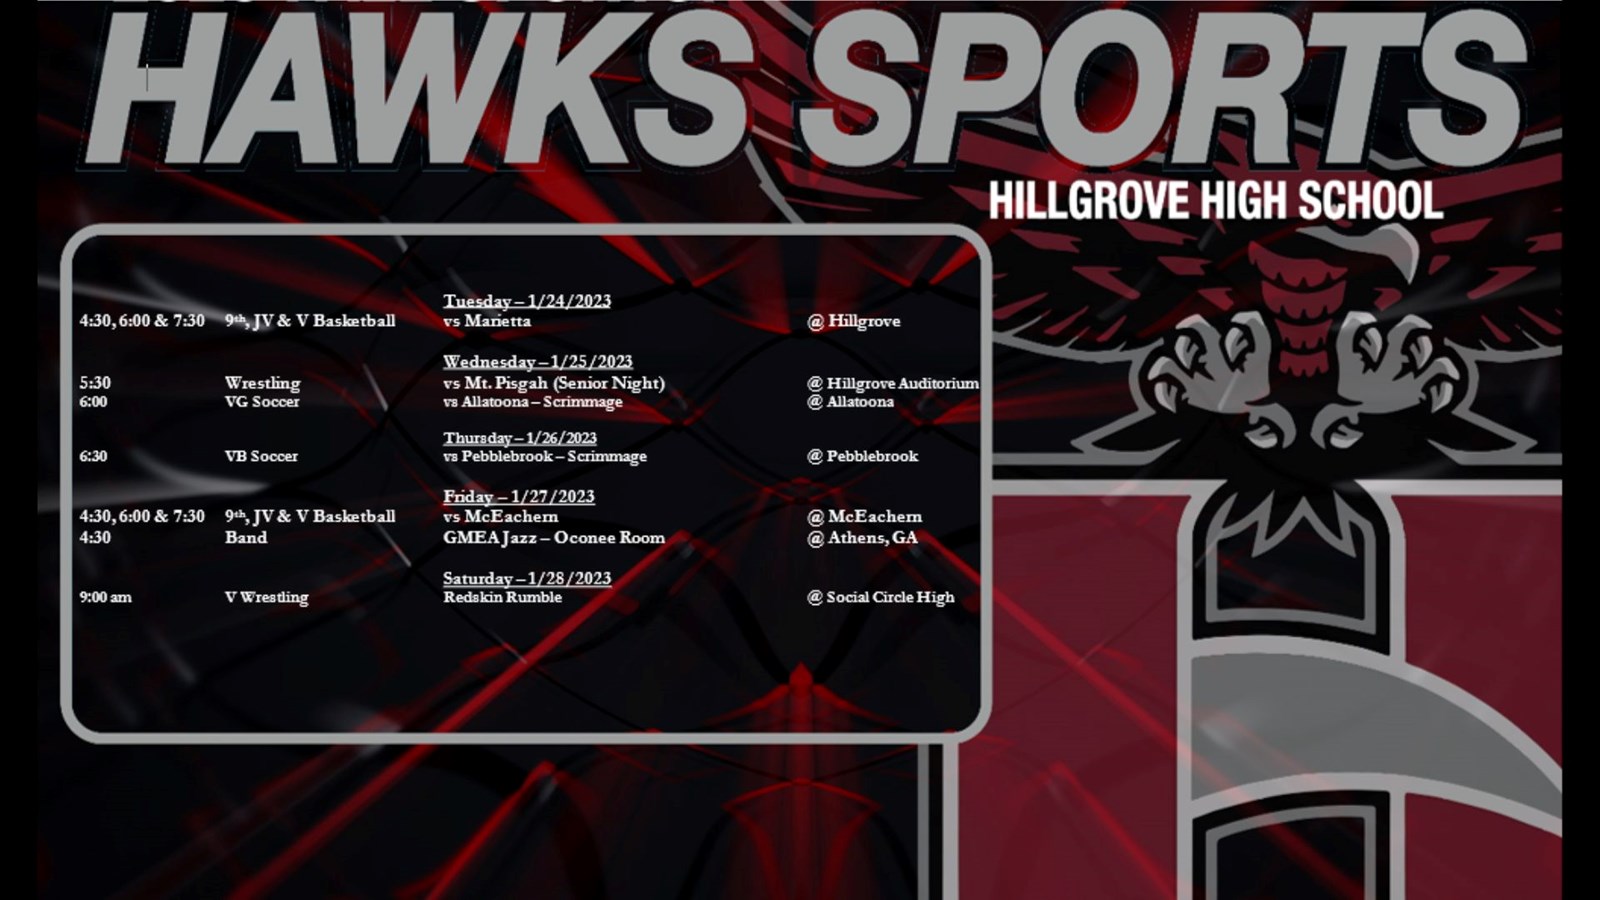 Hawks Sports for the week of January 23, 2023